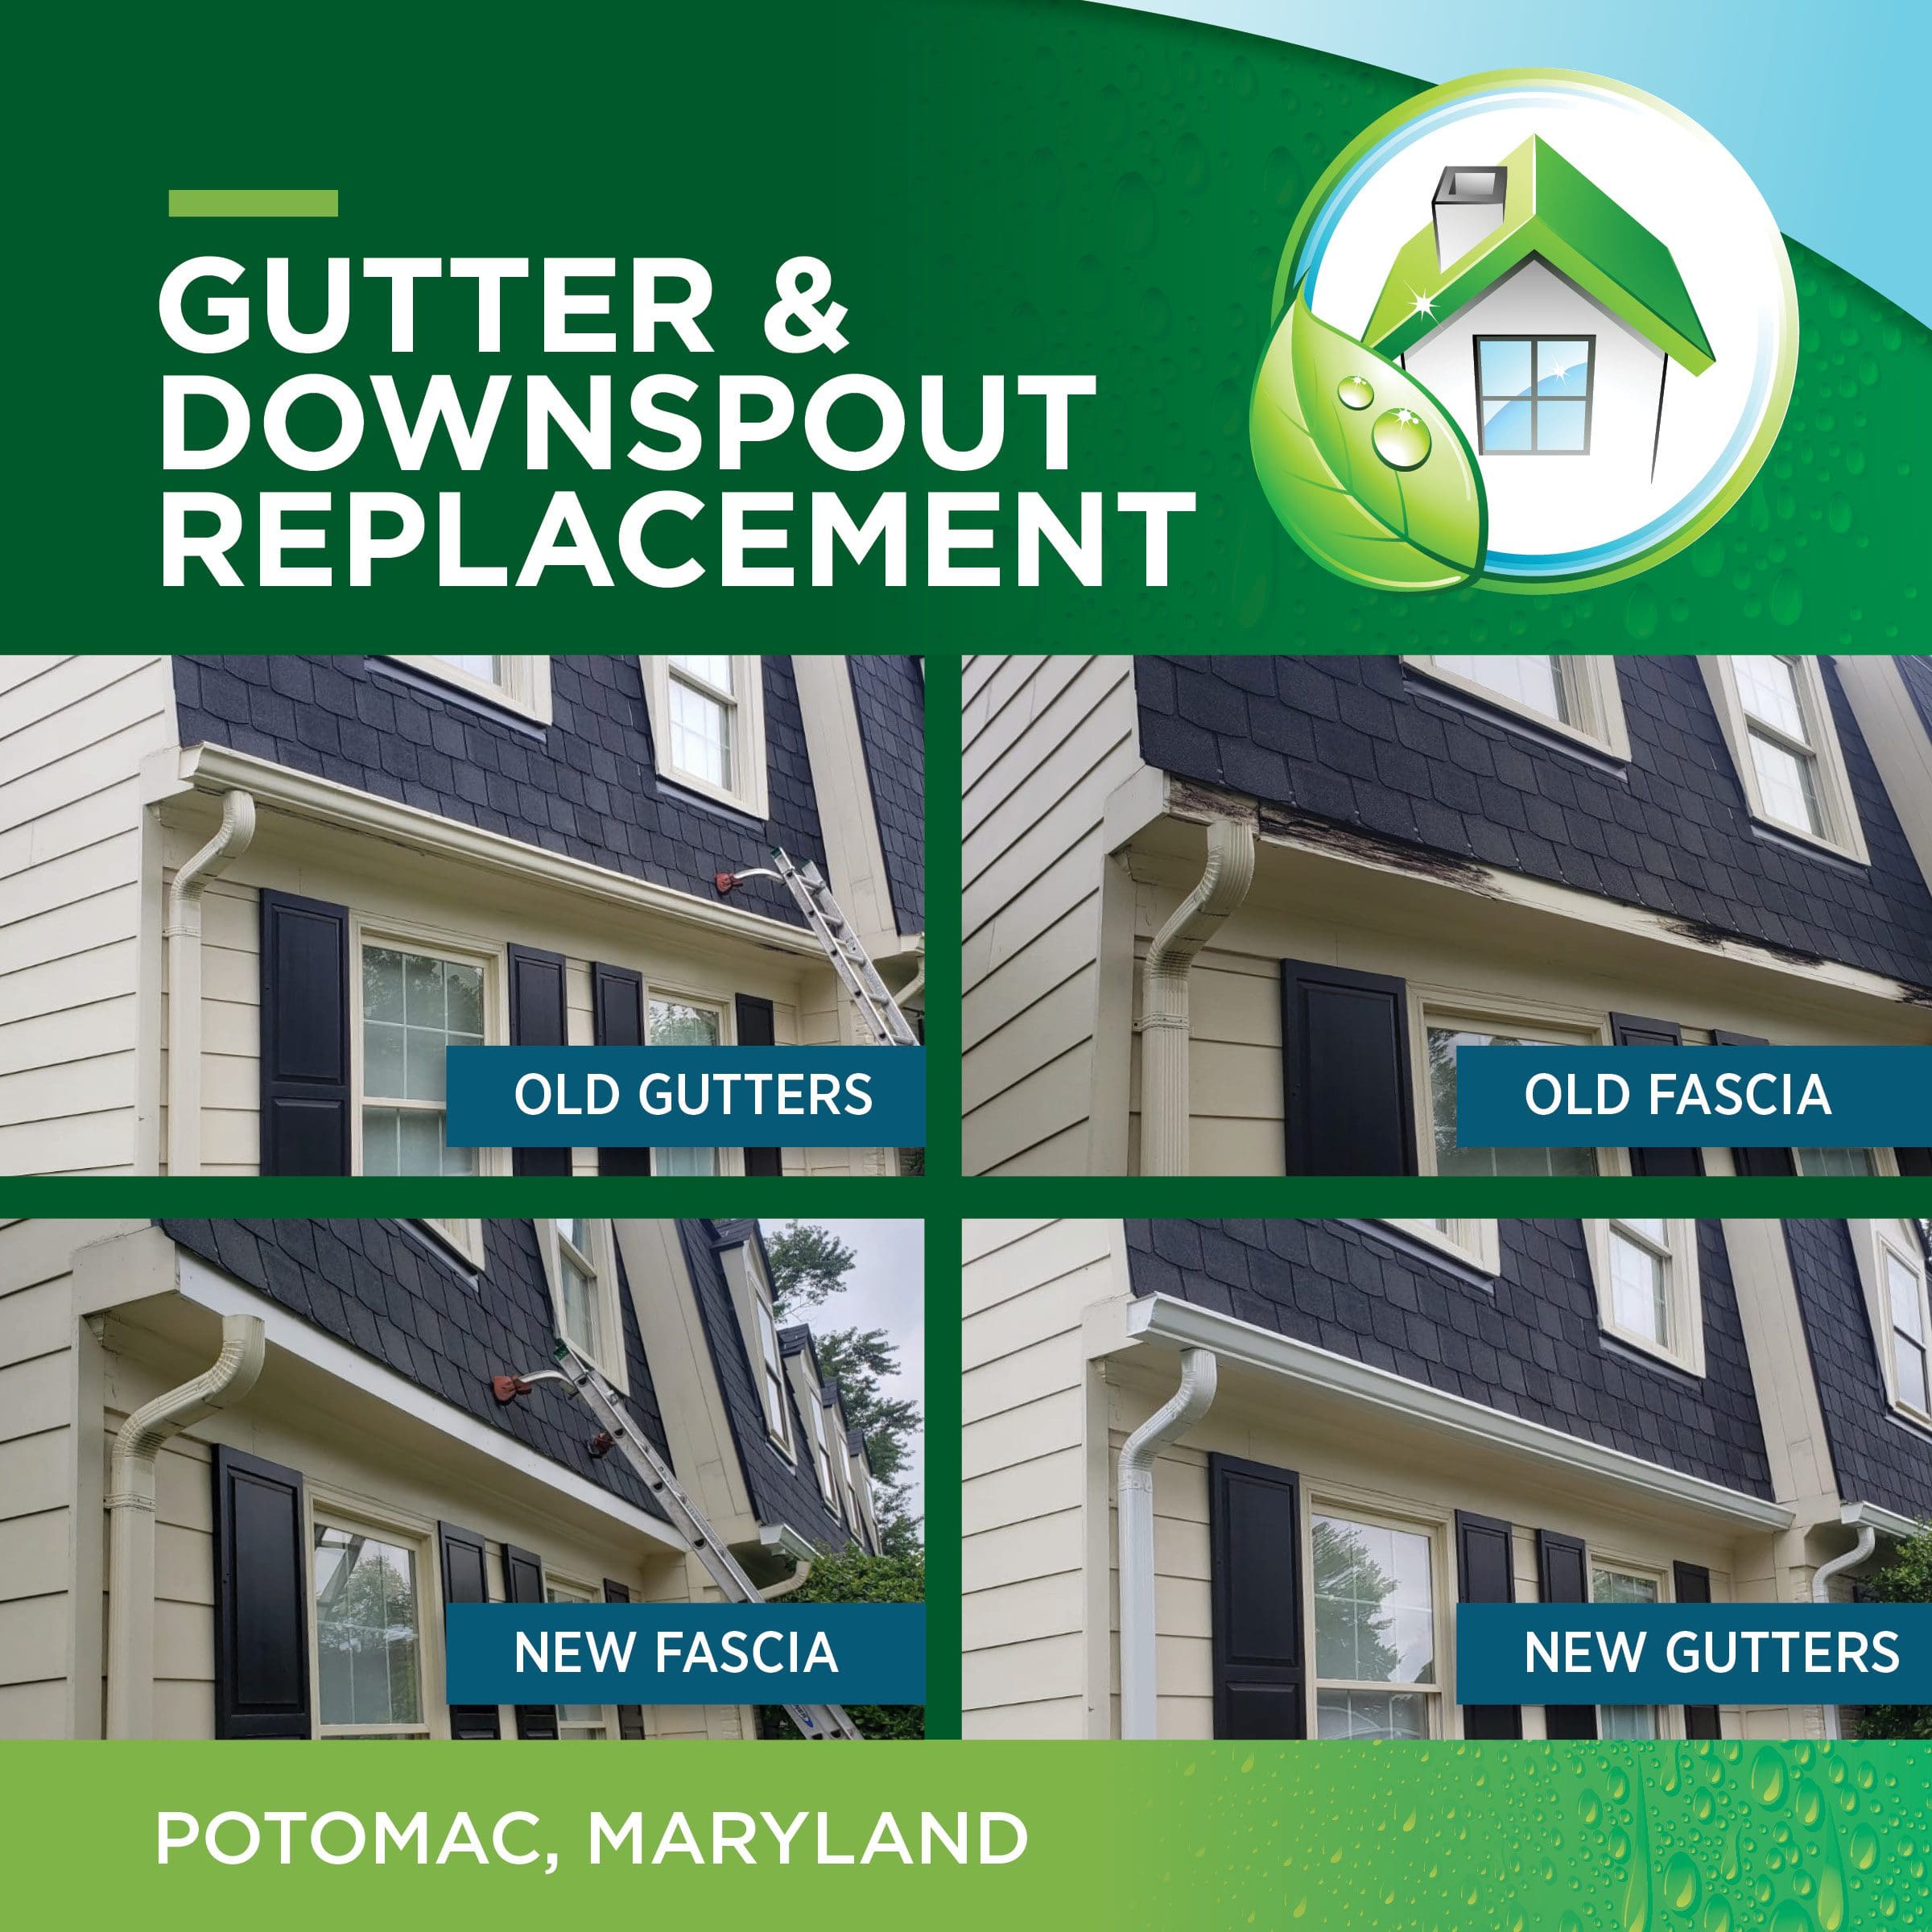 Gutter and downspout replacement in Potomac Maryland